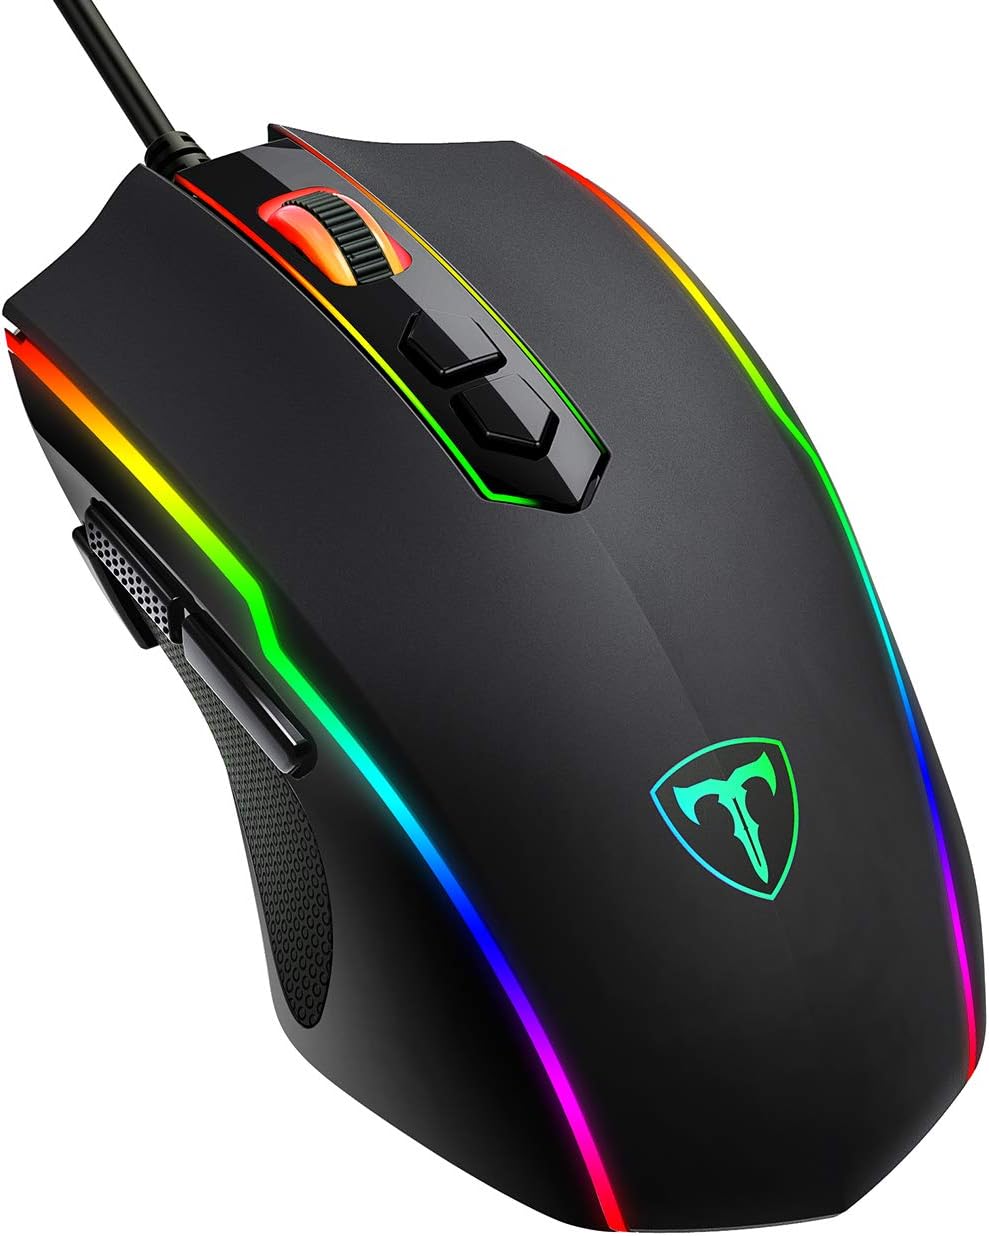 RisoPhy RGB Gaming Mouse Wired, PC Gaming Mice with 8 Programmable Buttons,Chroma RGB Backlit, 7200 DPI Adjustable,Comfortable Grip Ergonomic Optical Computer Gaming Mice with Shutton Button,Black